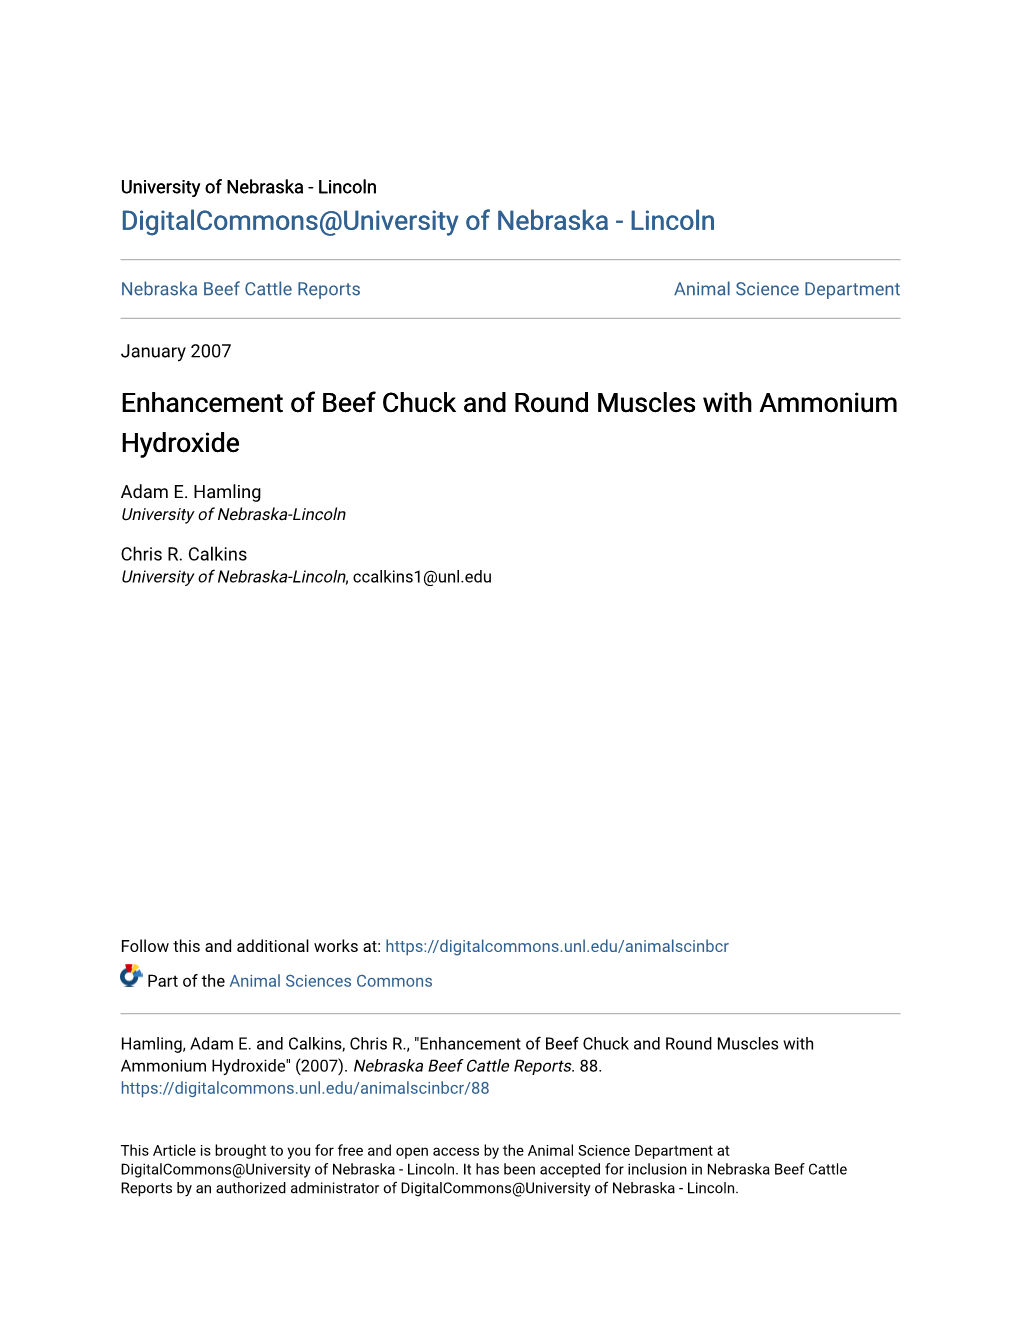 Enhancement of Beef Chuck and Round Muscles with Ammonium Hydroxide